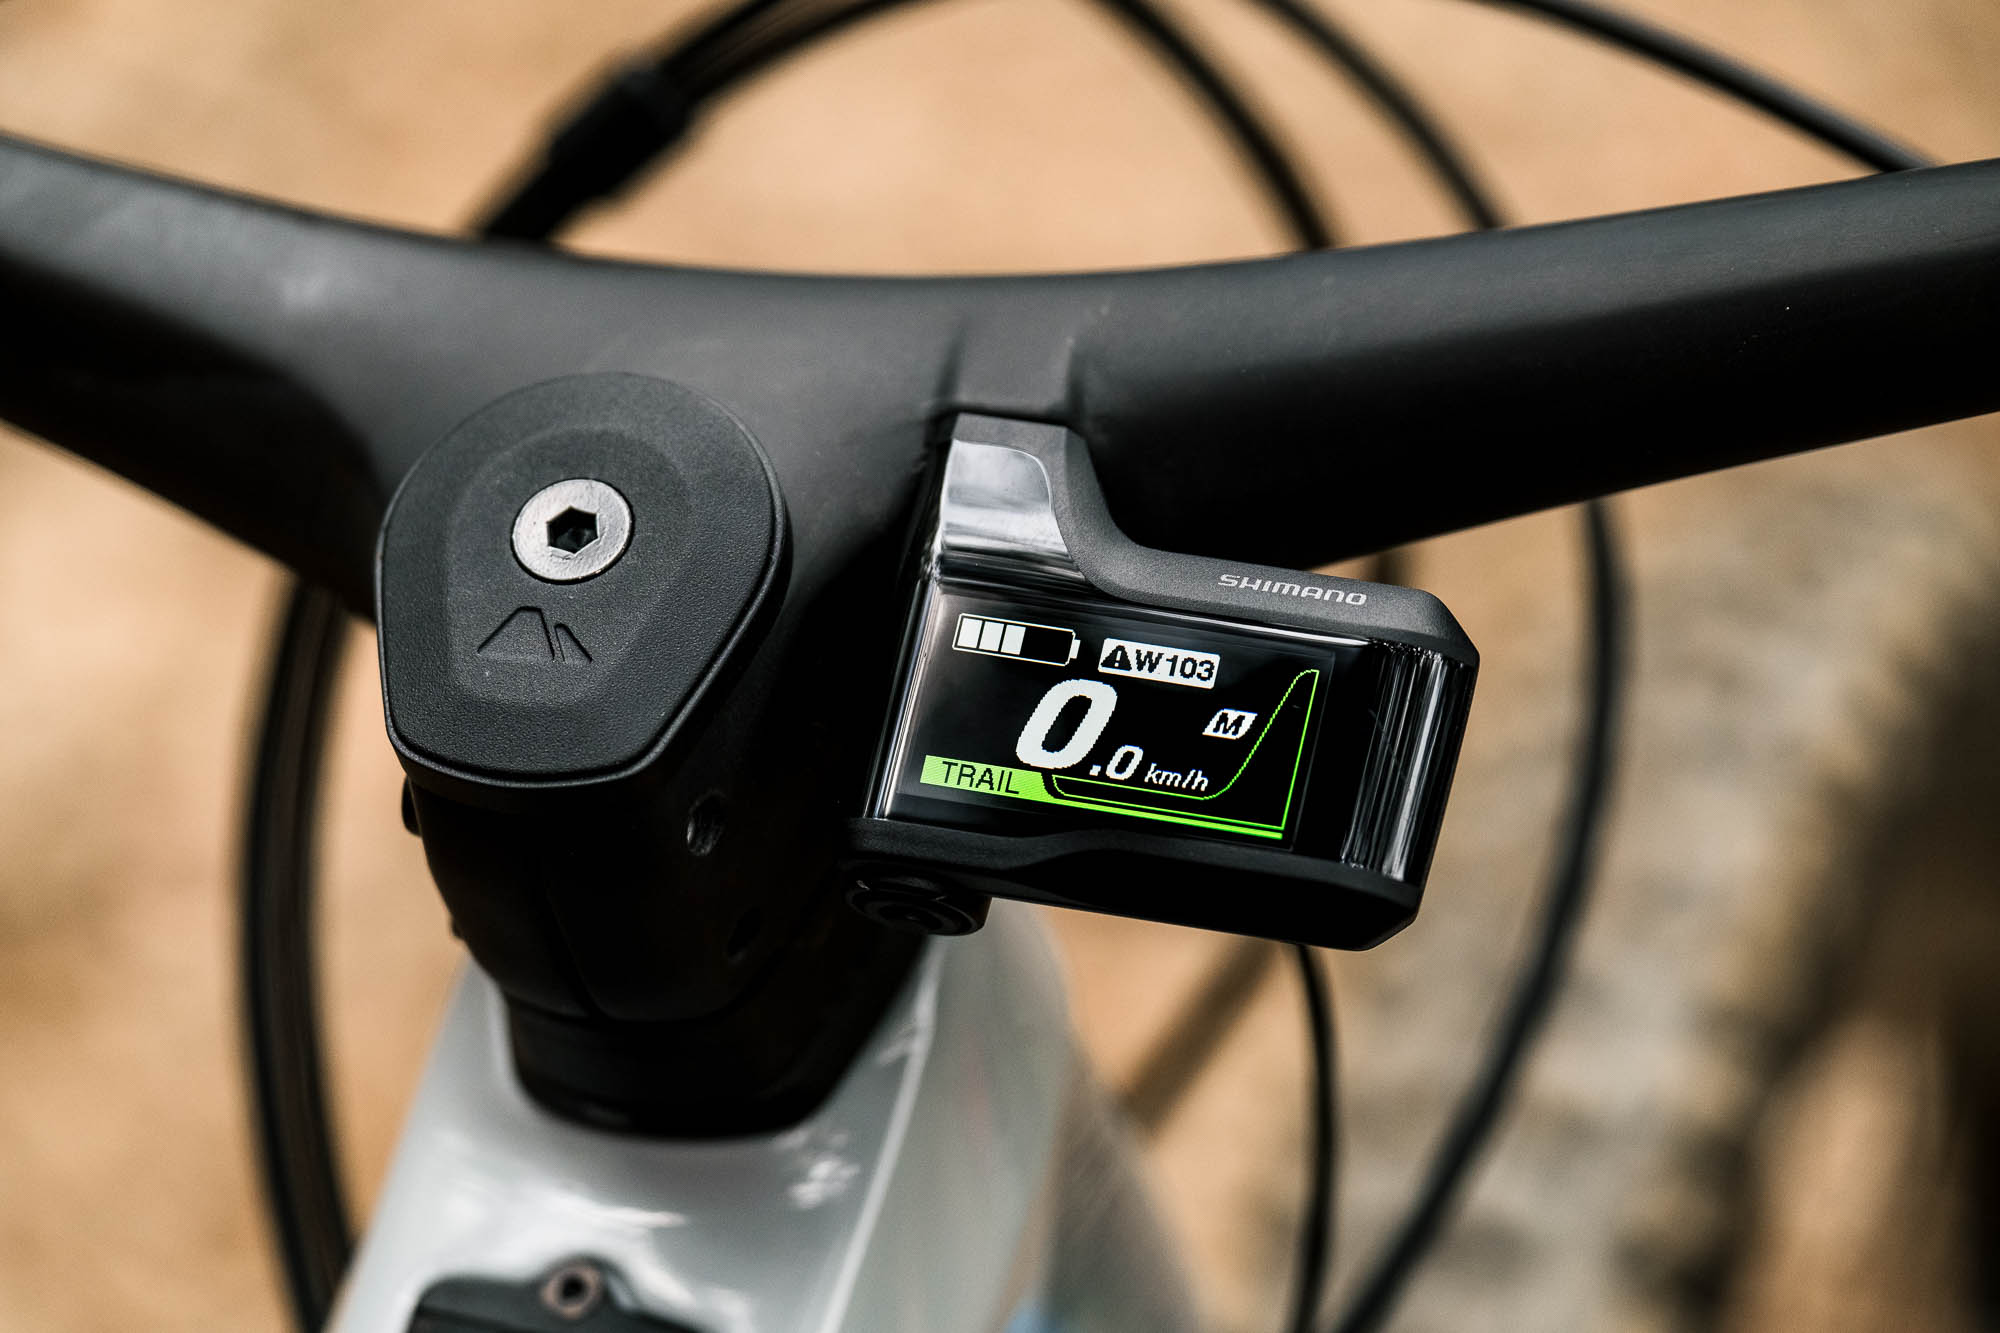 Ebike error codes and their solutions – Bosch 503, Shimano W103 and more